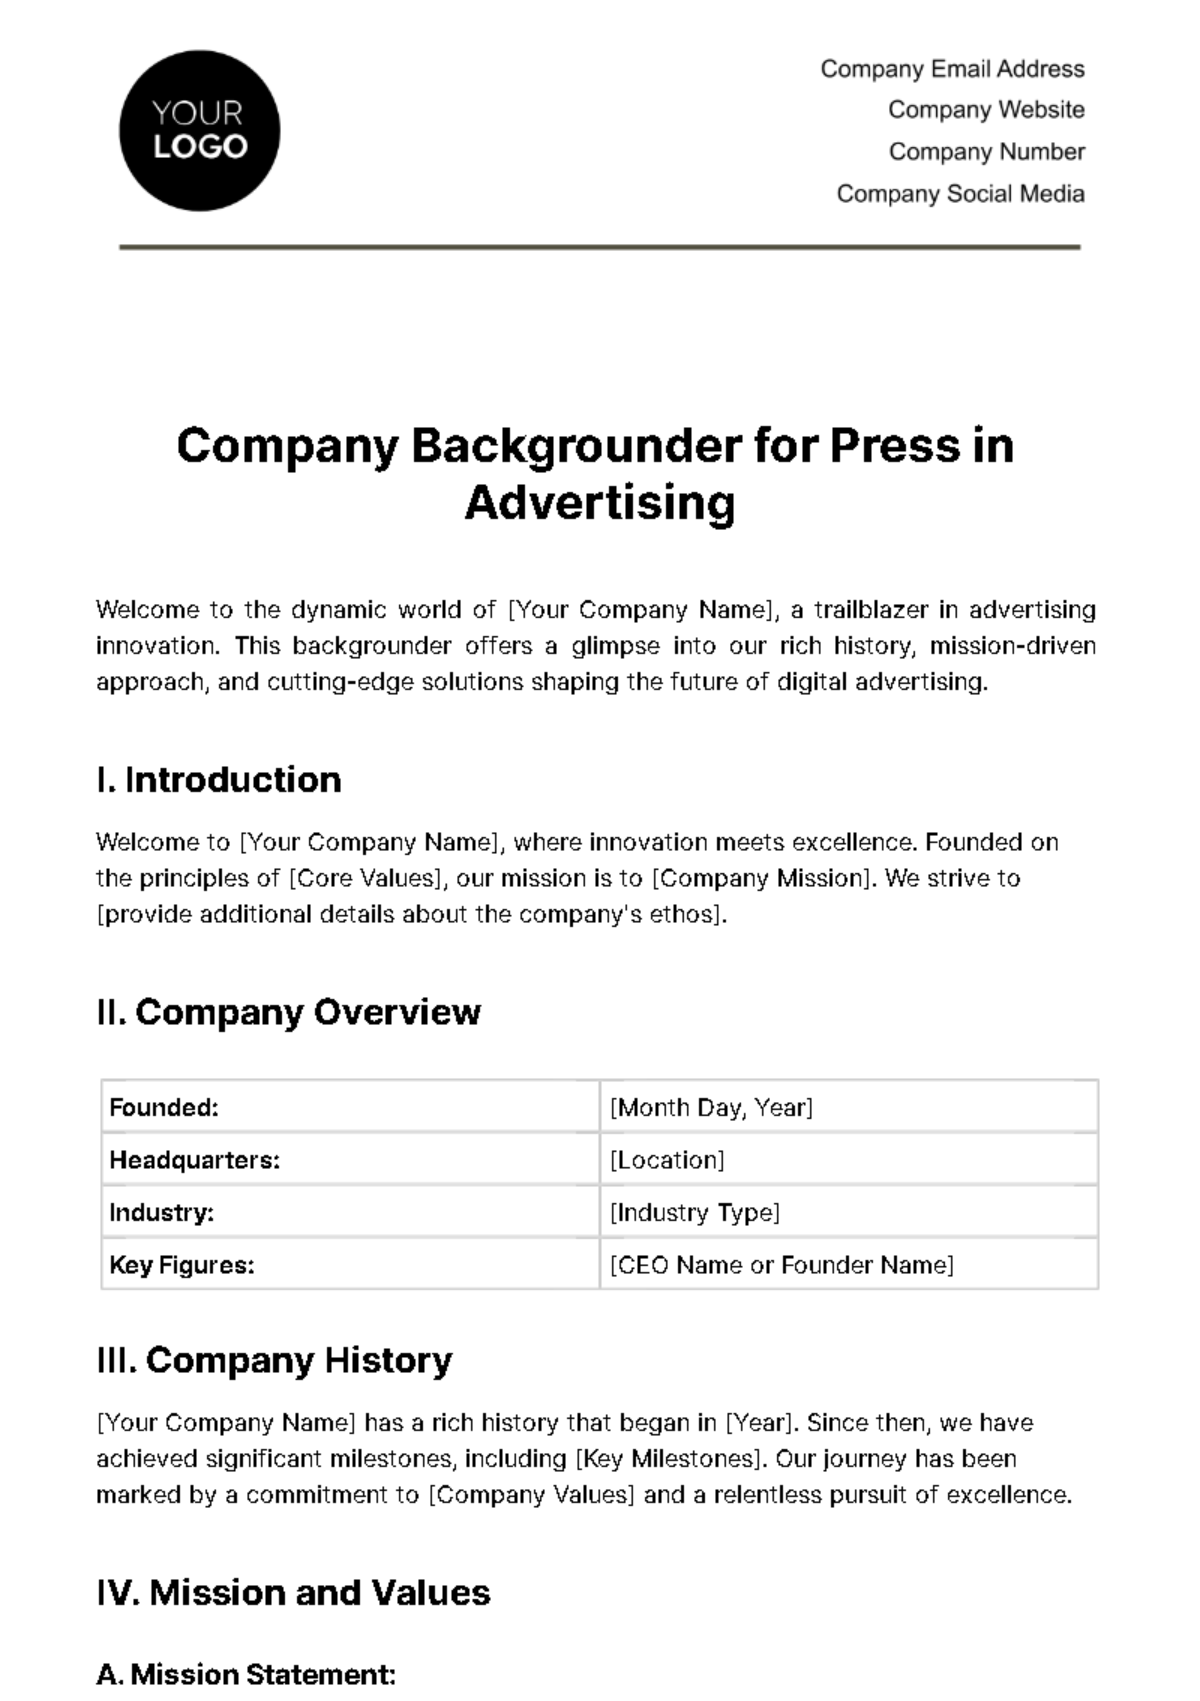 Company Backgrounder for Press in Advertising Template